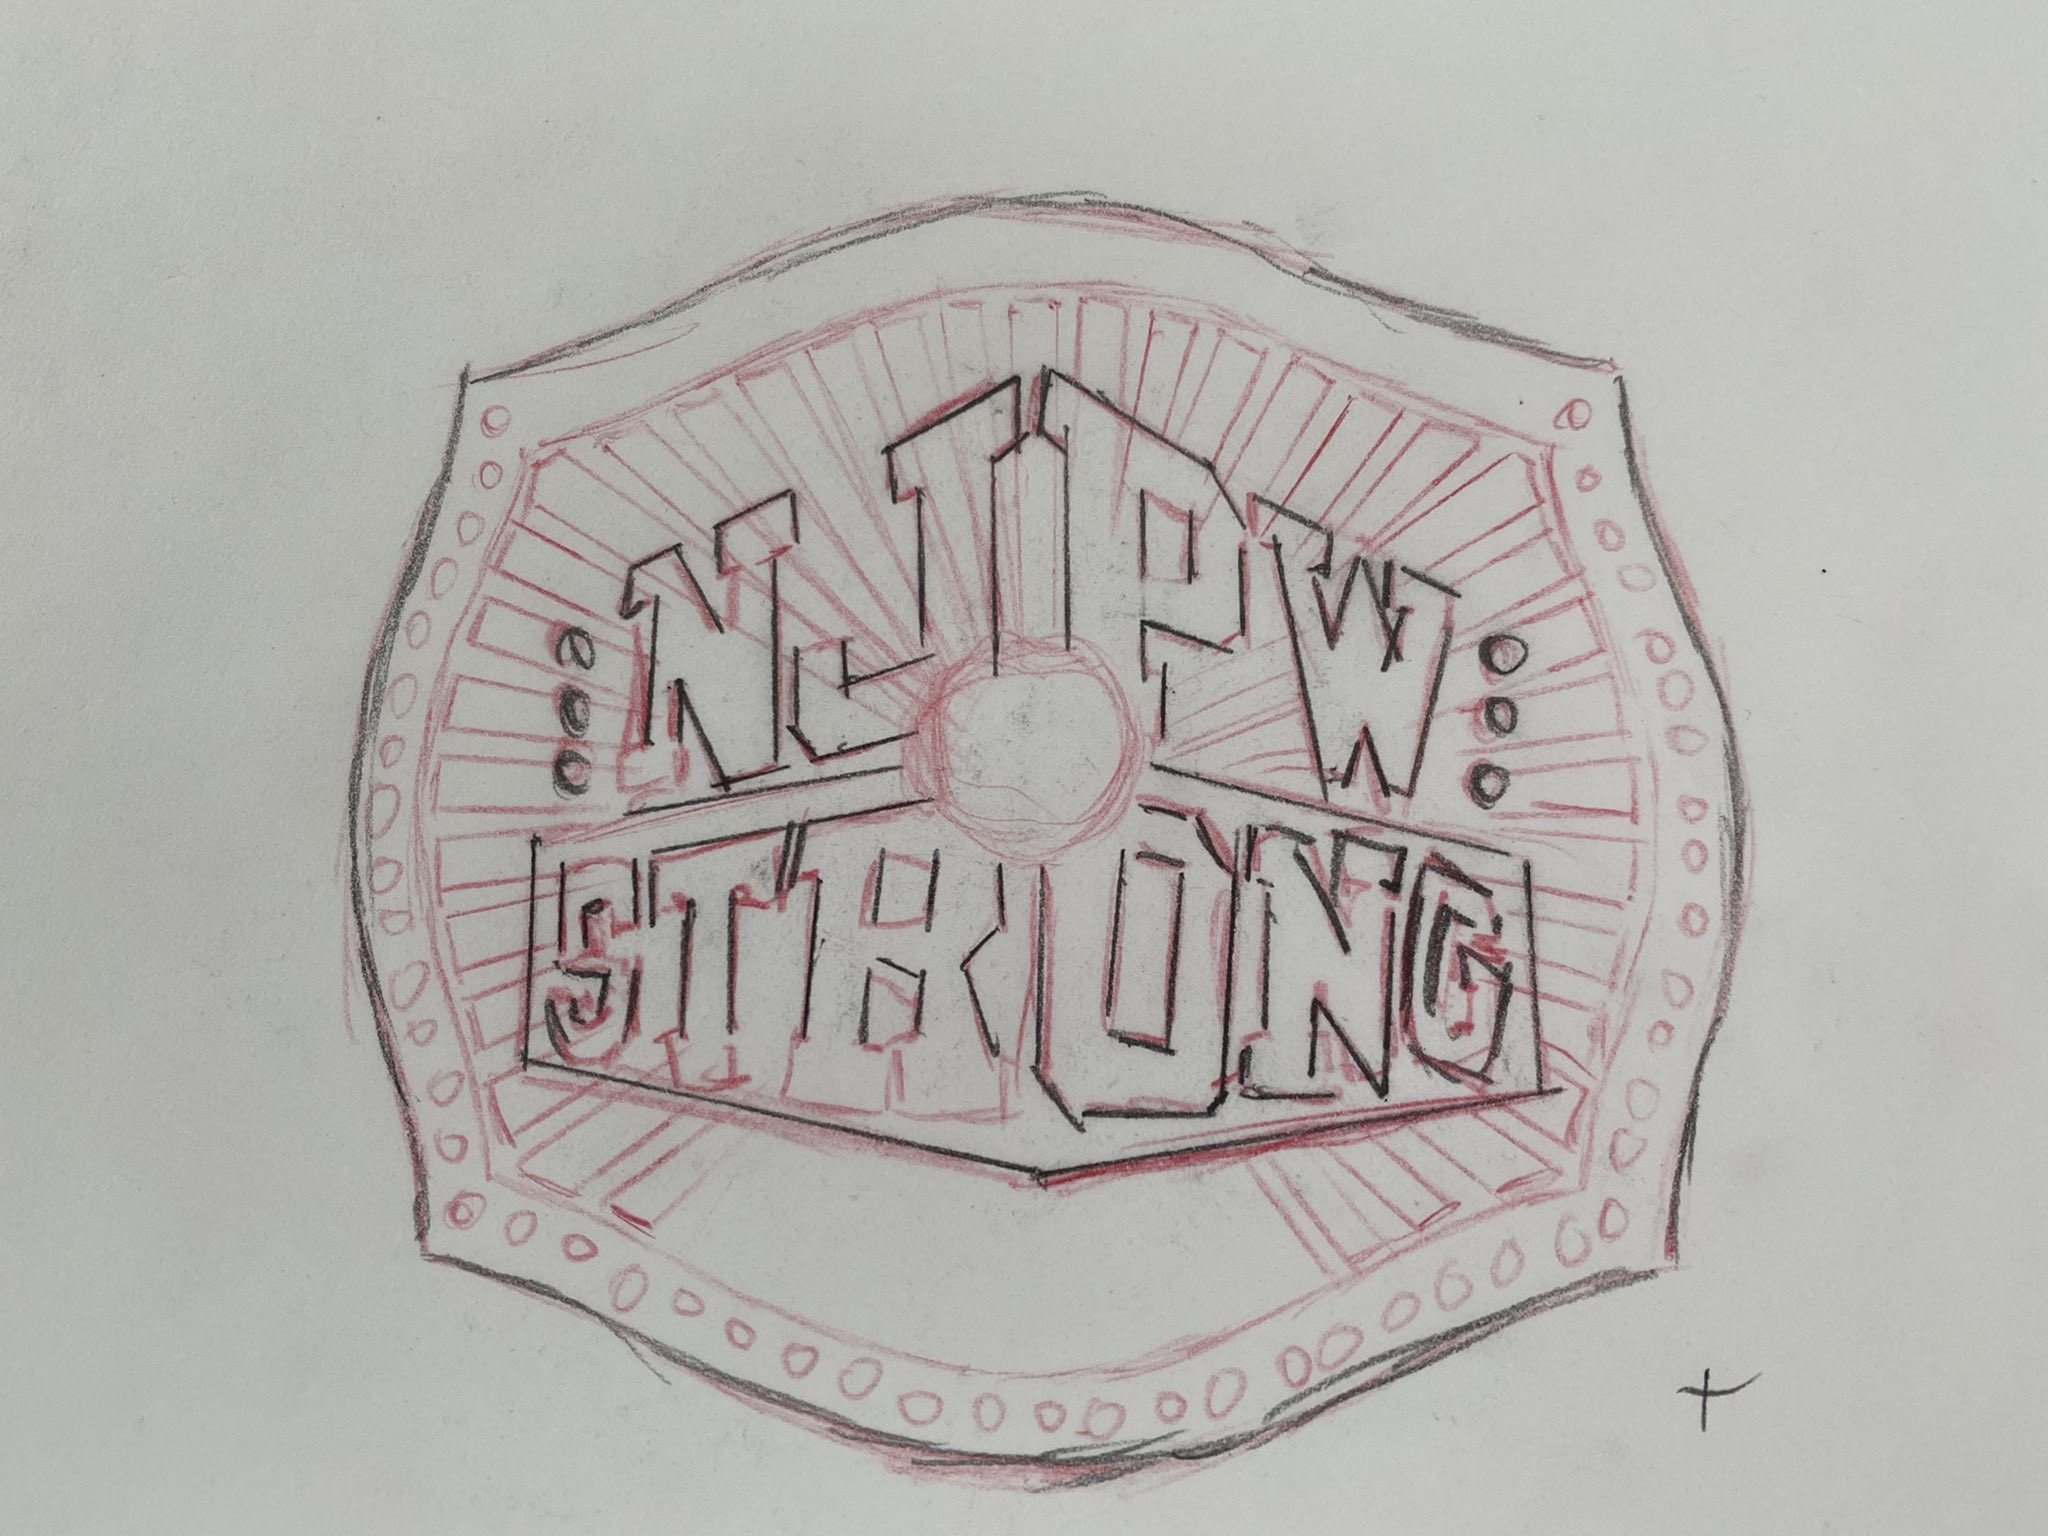 David marquez on x i hope you enjoy the new njpwstrong openweight title this is my rd championship ive designed for the pany including iwgp v ive included my original sketch and